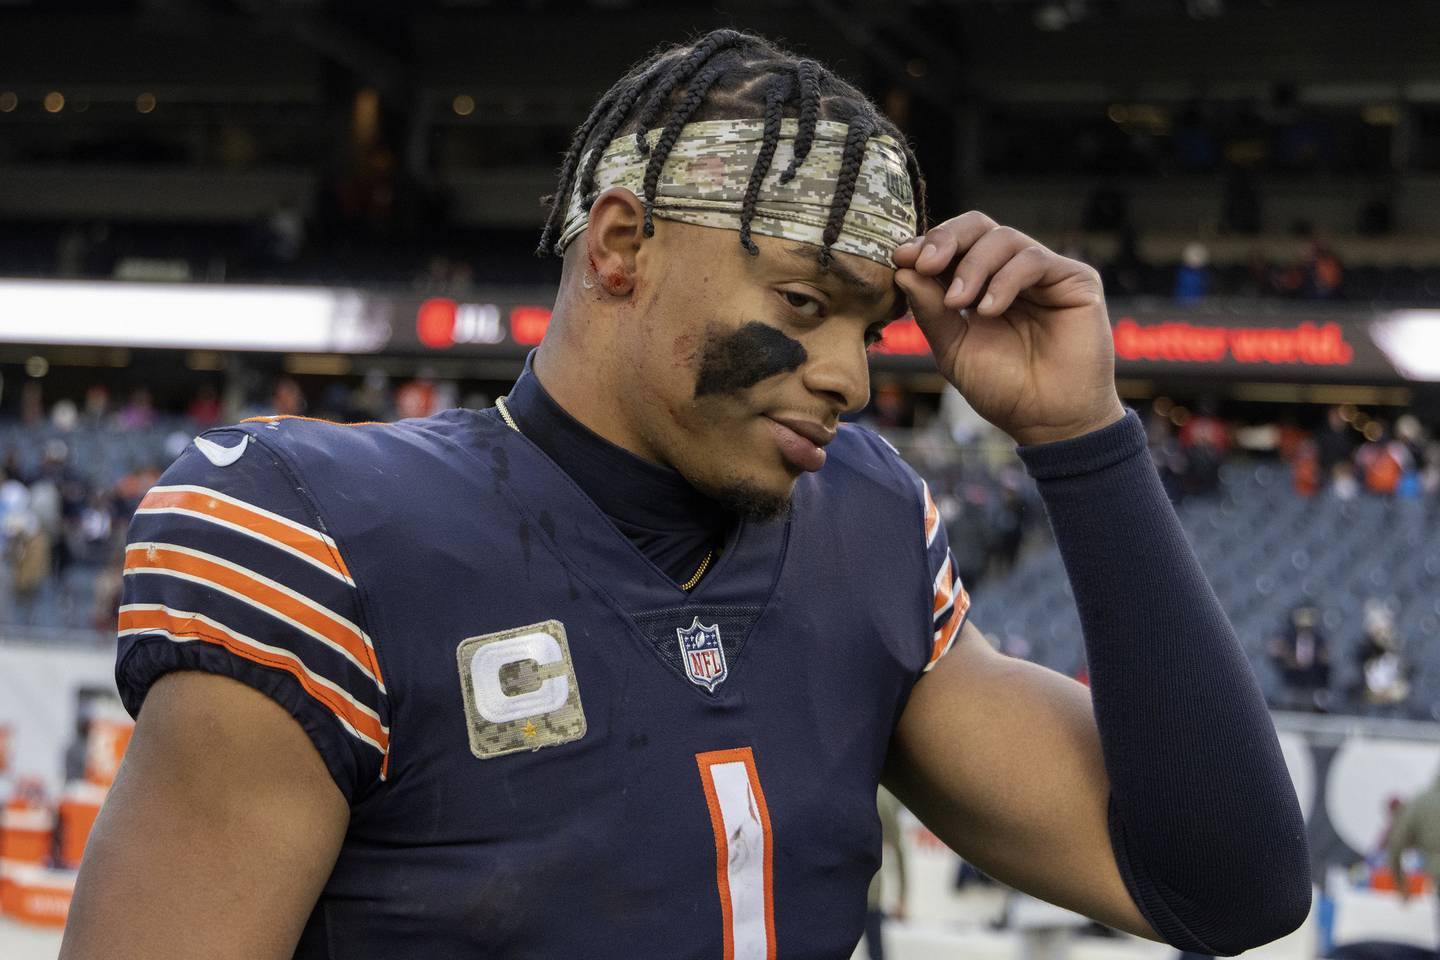 Chicago Bears quarterback Justin Fields leaves the field after his team’s 31-30 loss to the Detroit Lions, Nov. 13, 2022, at Soldier Field.